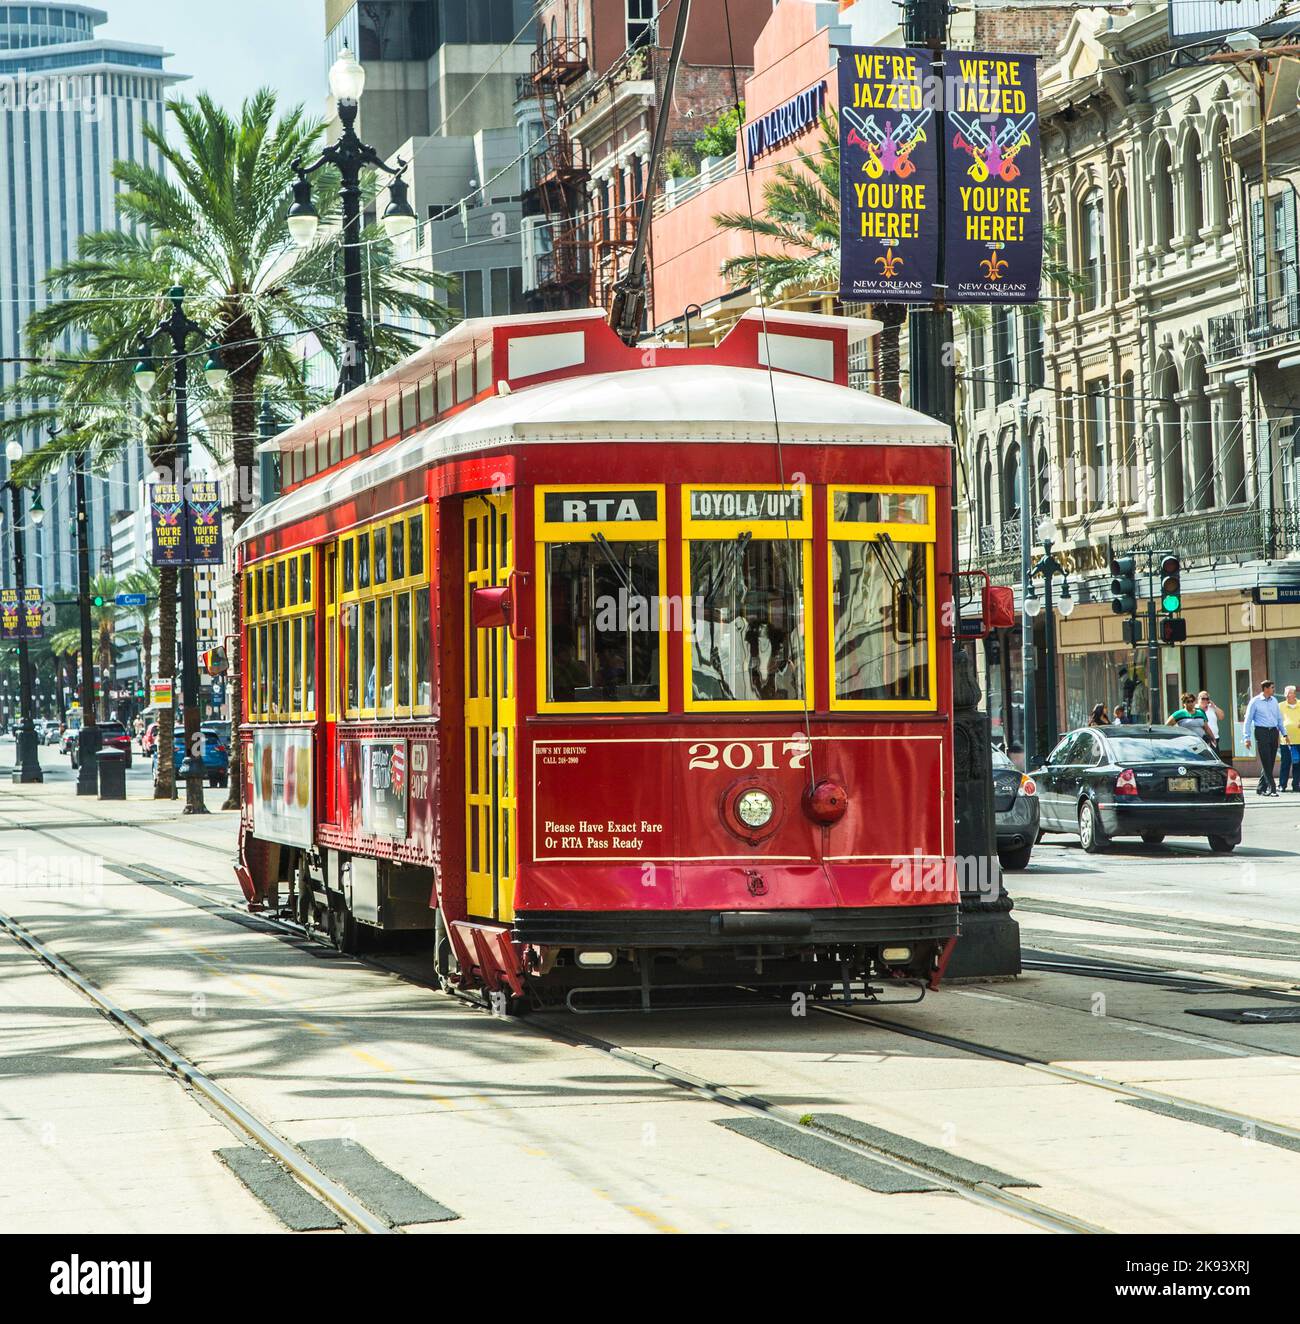 NEW ORLEANS, USA - JULY 17: New Orleans Streetcar Line, July 17, 2013. Newly revamped after Hurricane Katrina in 2005, the New Orleans Streetcar line Stock Photo